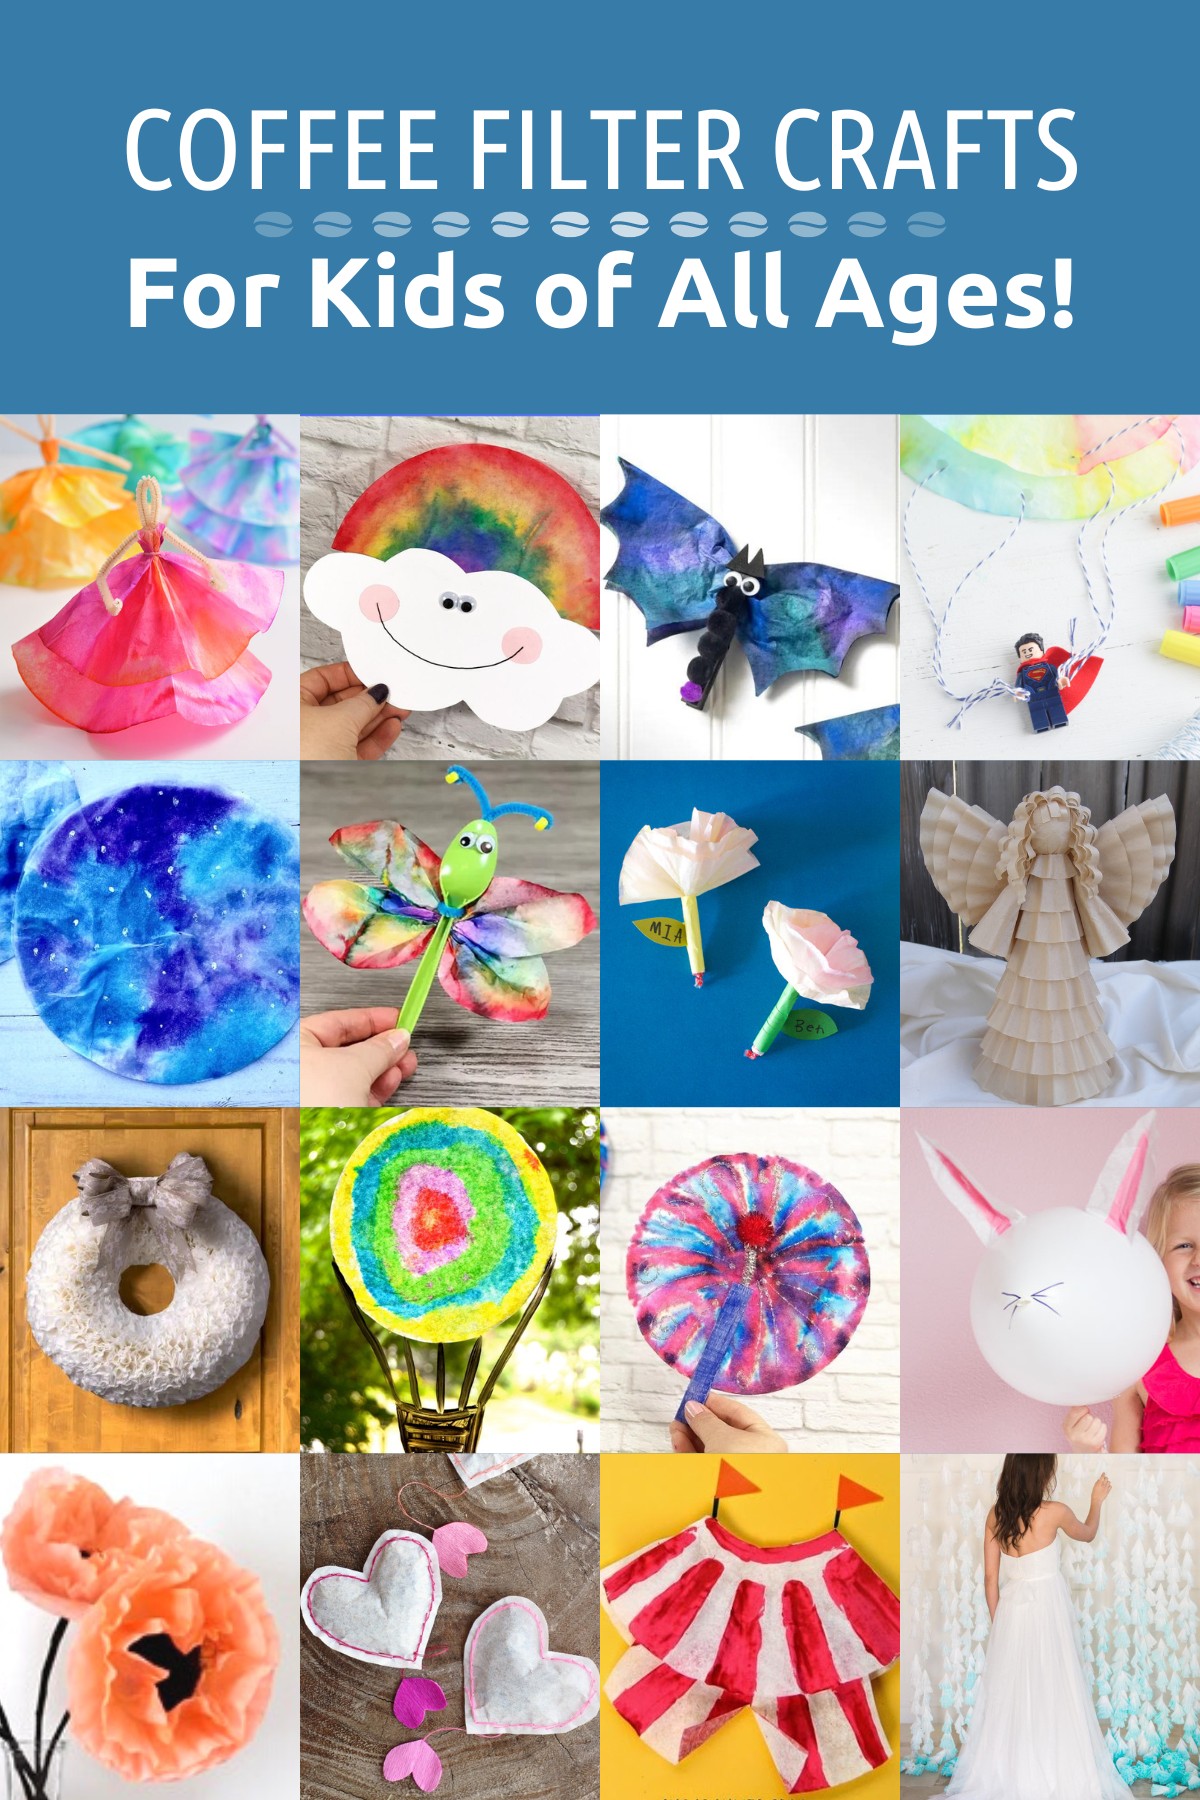 Coffee Filter Crafts for kids of all ages